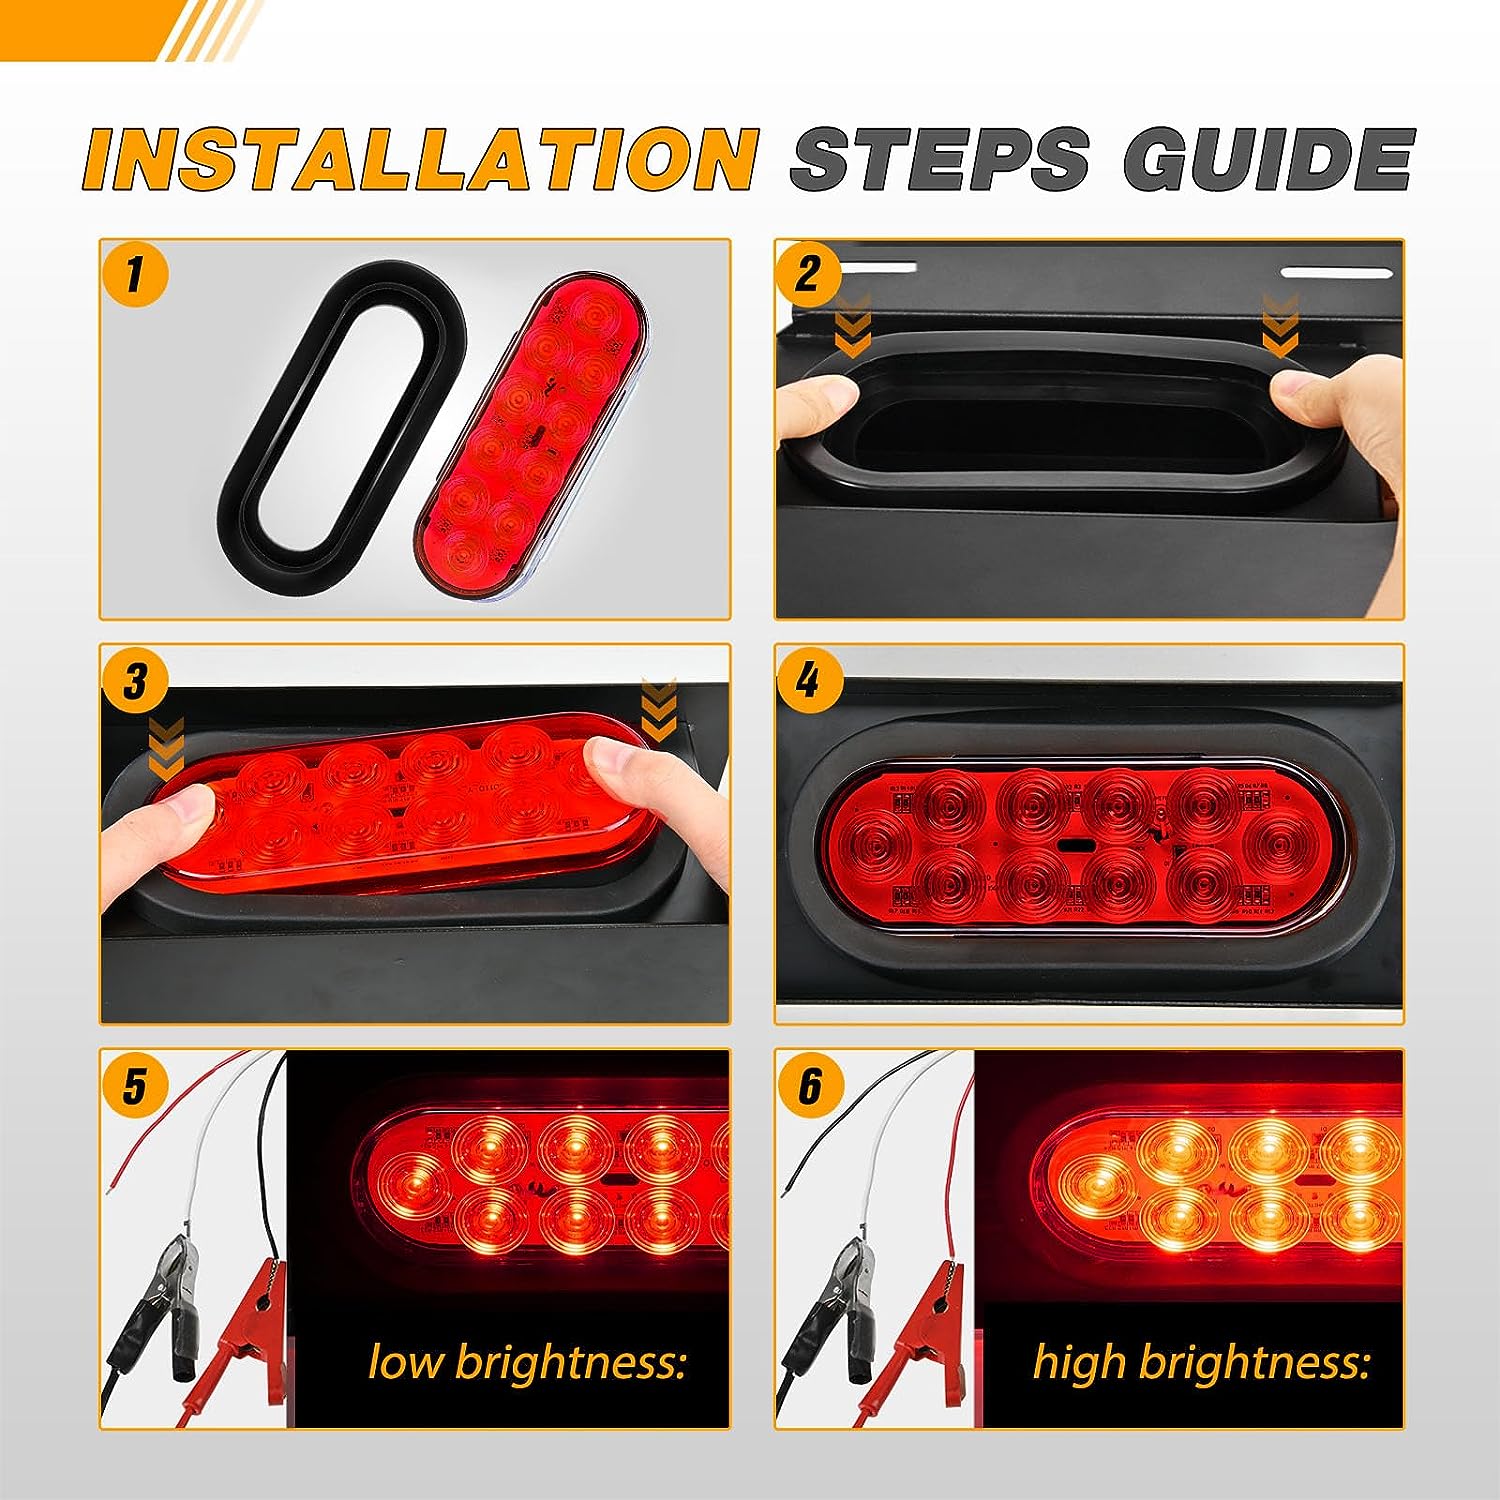 6" Oval 10Leds Red Trailer Tail Light (Pair)